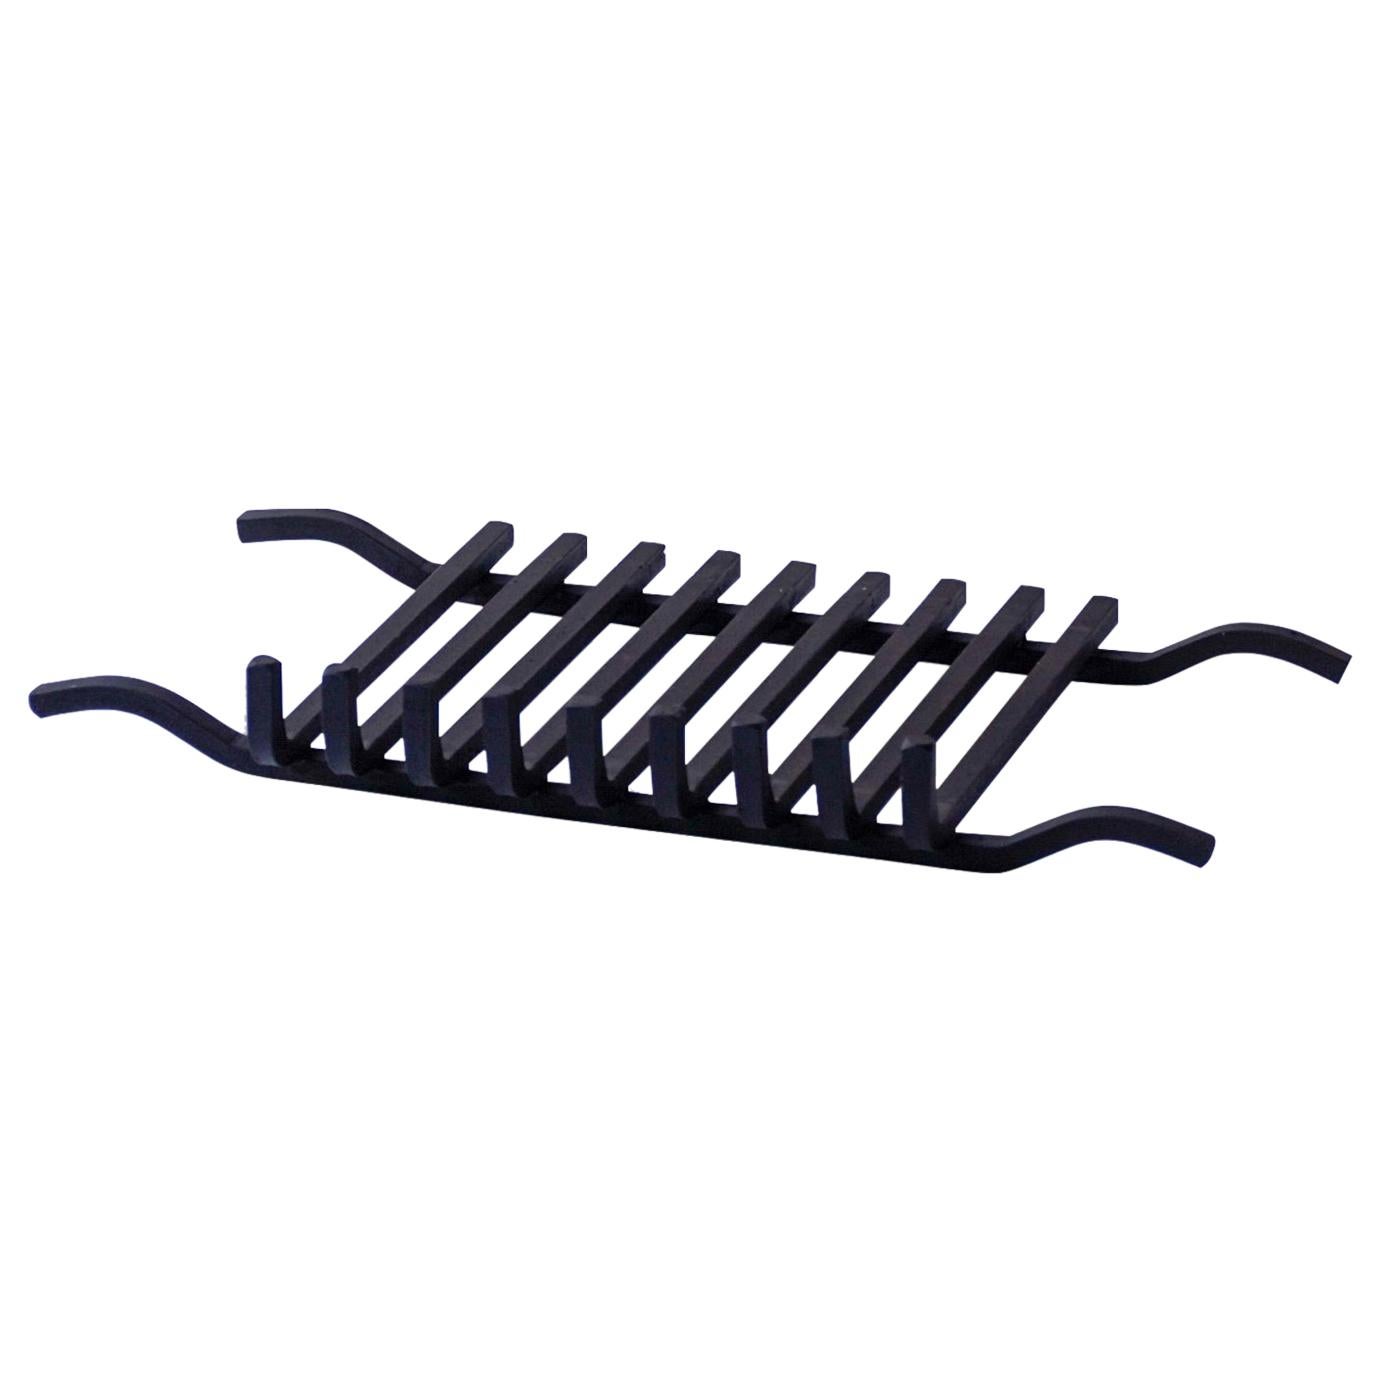 Fireplace Grate for Andirons, Firedogs